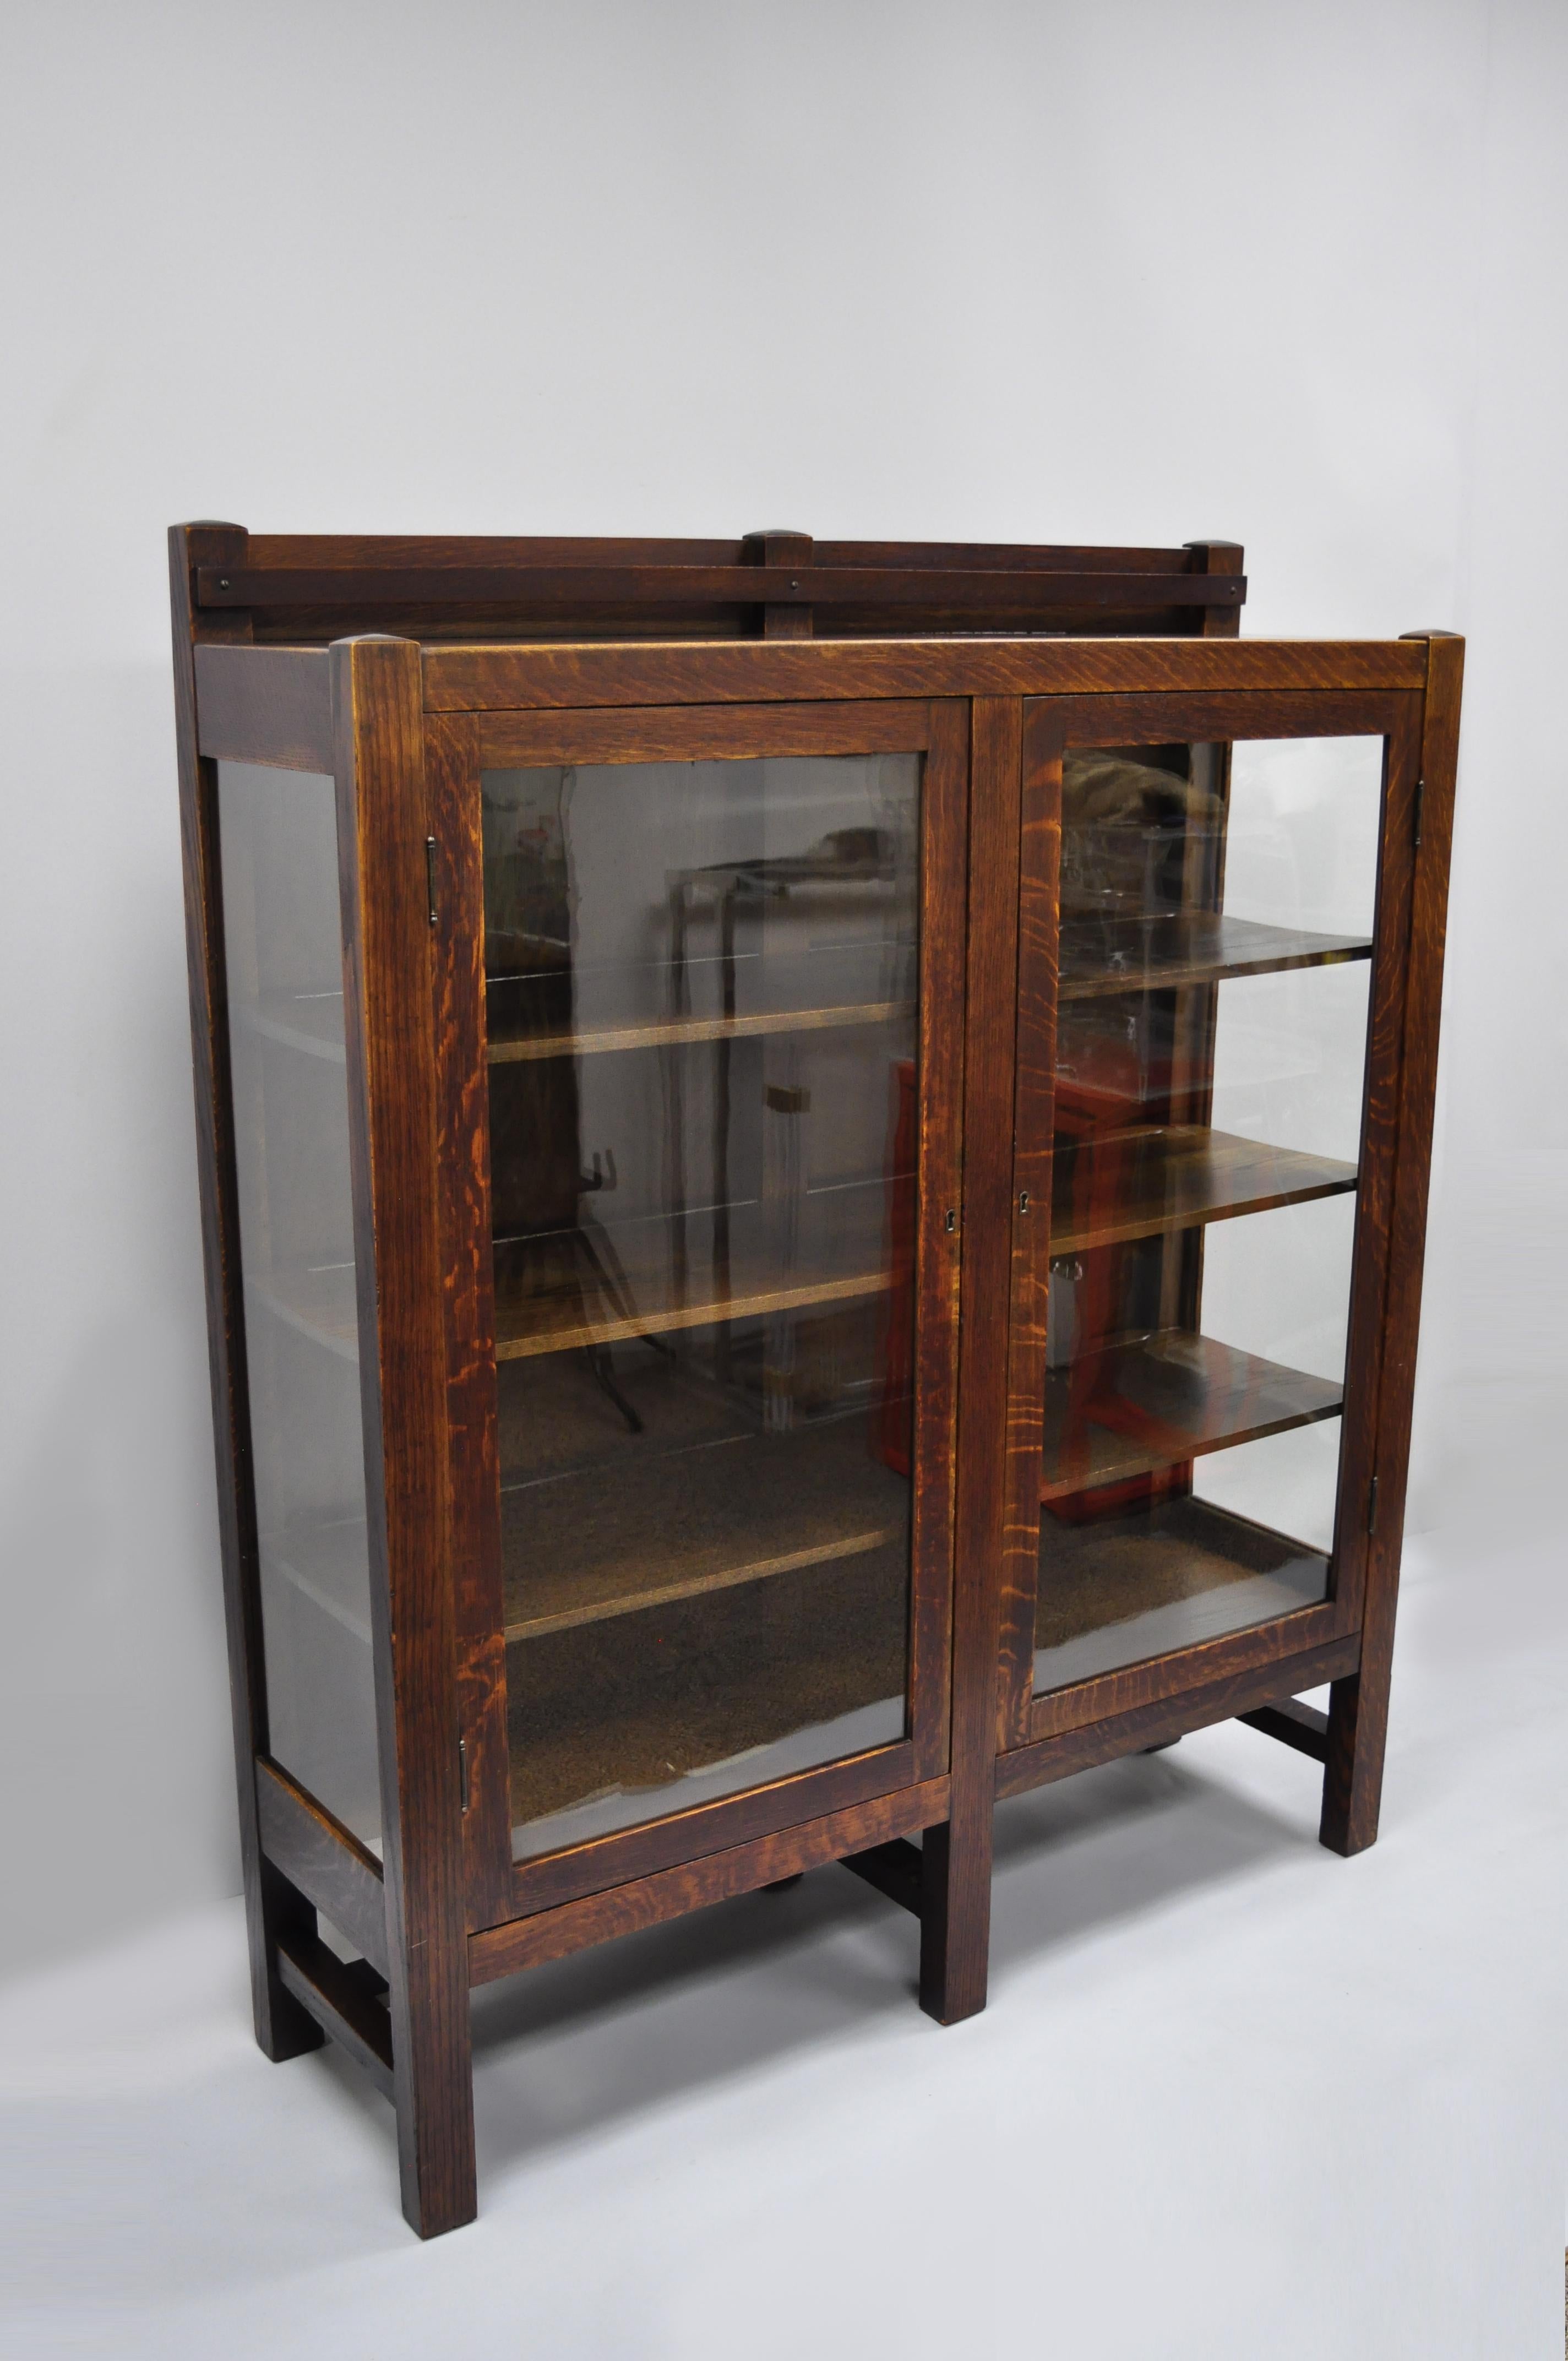 Mission Arts & Crafts Stickley era glass double door China cabinet bookcase. Item features 6 legs, stretcher base, 2 glass doors, glass sides, solid wood construction, beautiful wood grain, working lock and key, 3 wooden shelves, quality American